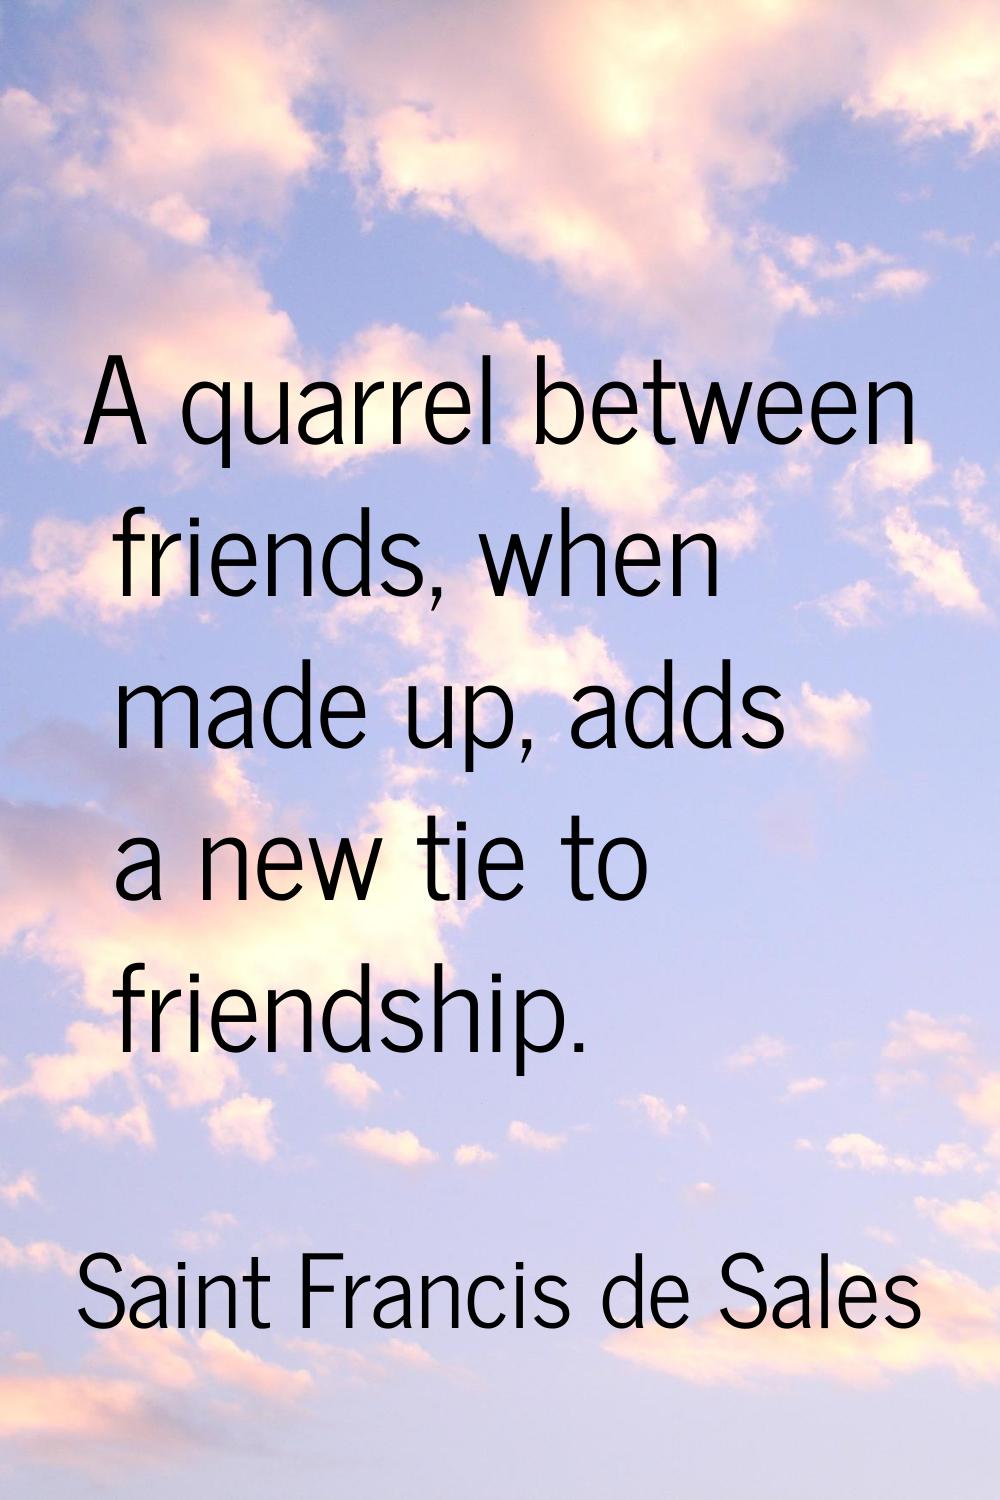 A quarrel between friends, when made up, adds a new tie to friendship.